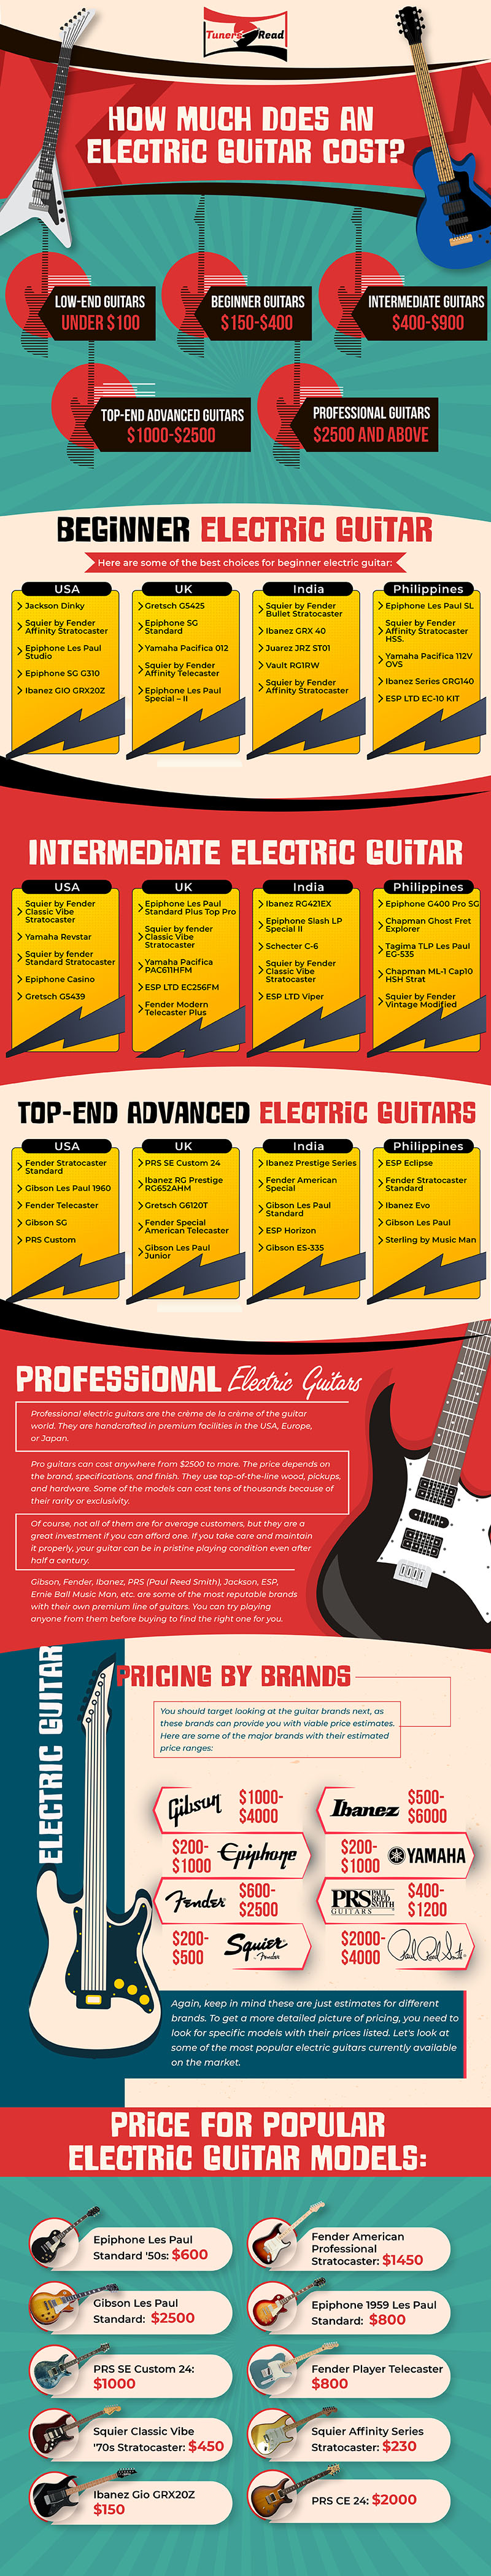 How Much Does an Electric Guitar Cost?